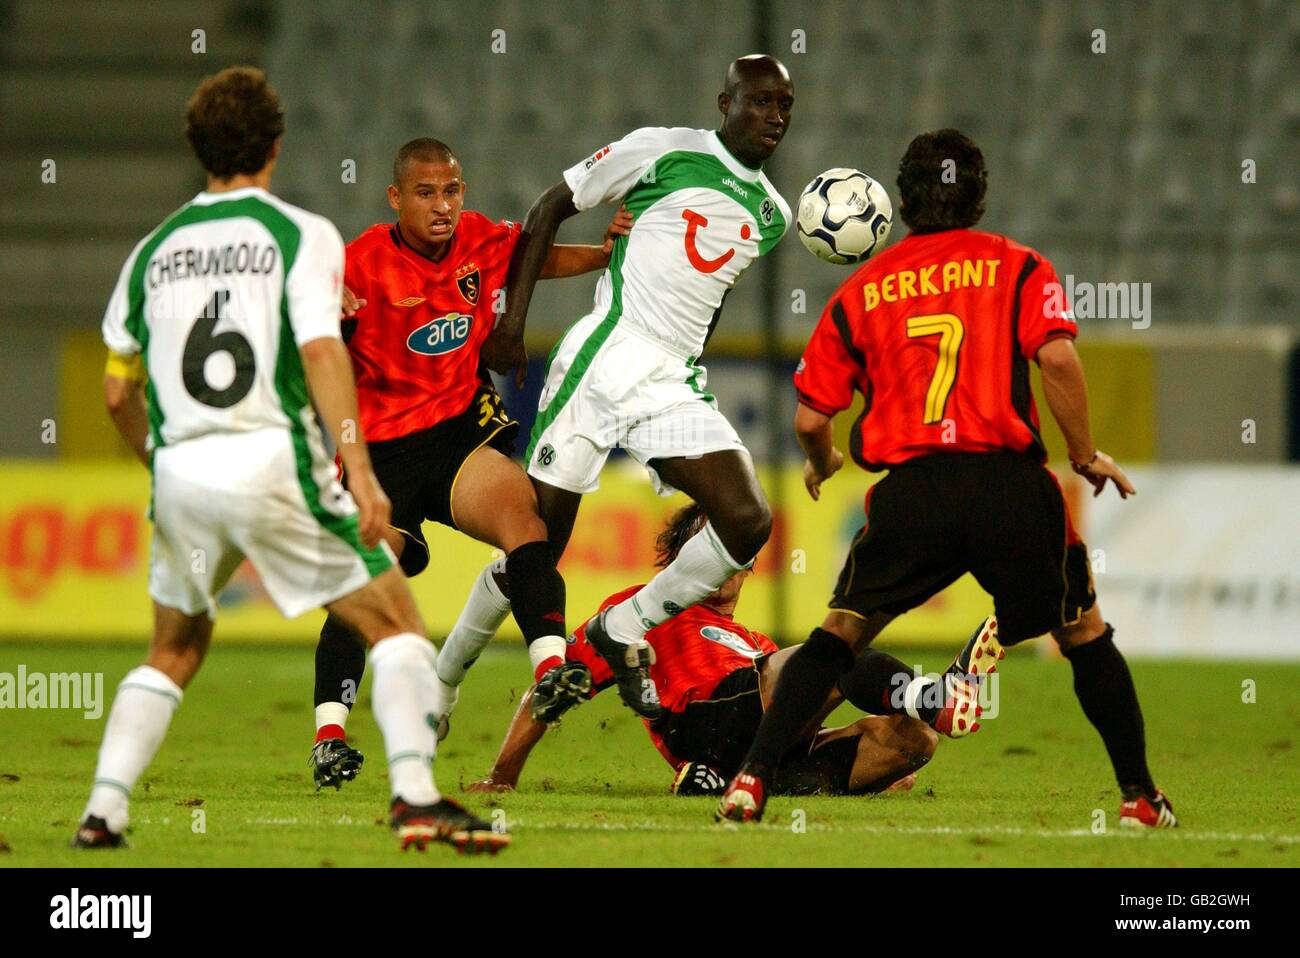 Soccer - Alpen cup 2003 Final - Galatasaray v Hannover 96. Babacar N'Diaye of Hannover 96 controls the ball Stock Photo